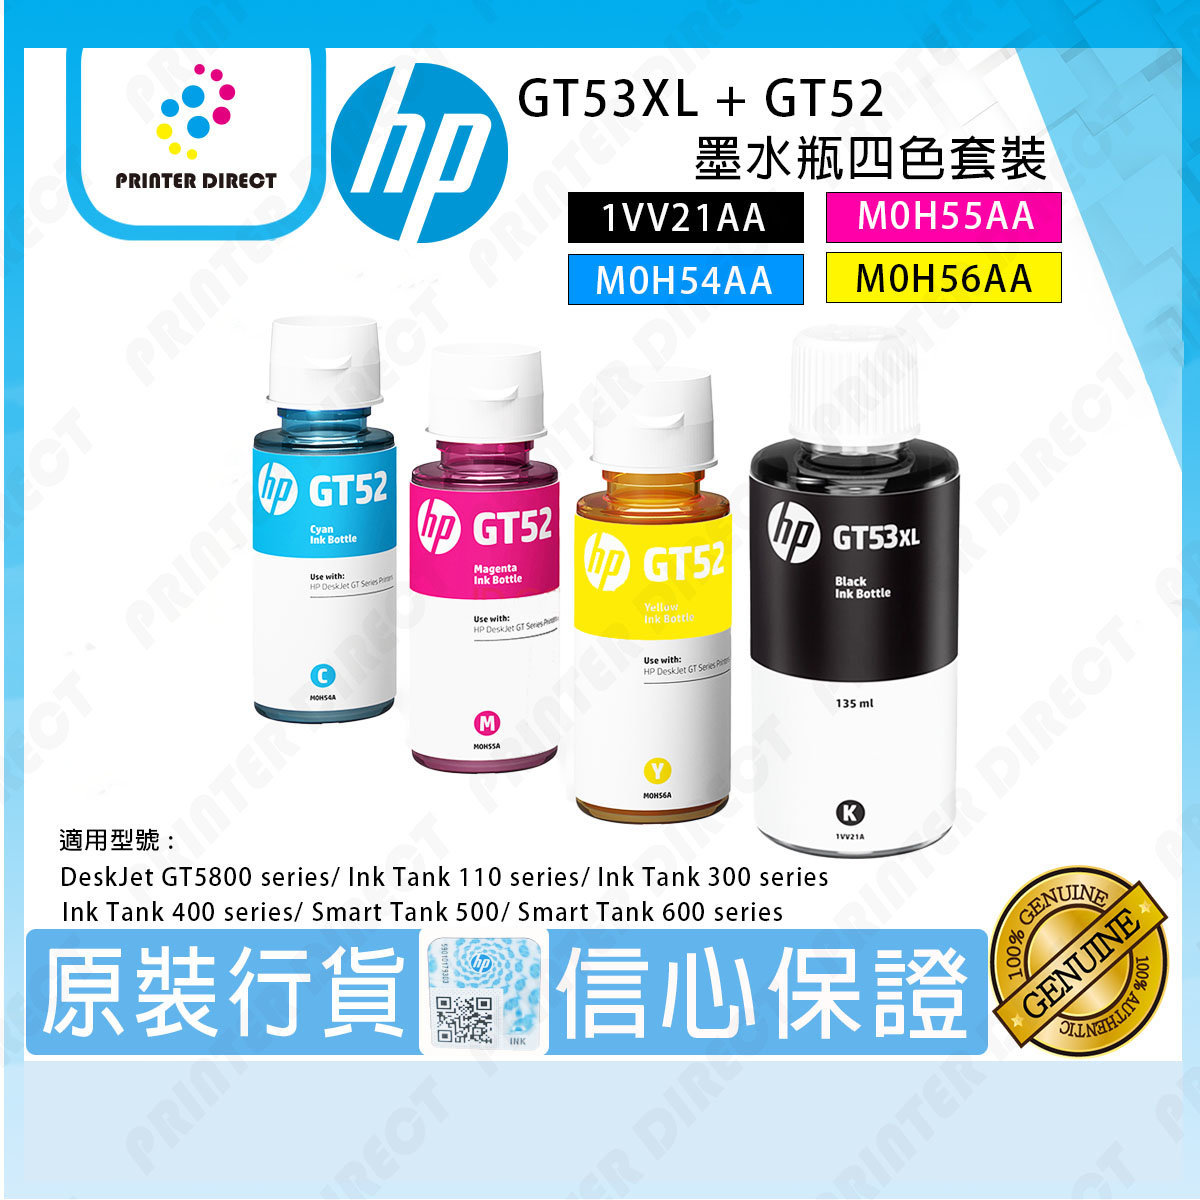 HP - GT53XL + GT52 四色套裝 (1VV21AA+M0H54AA+M0H55AA+M0H56AA) FOR HP TANK 515 615